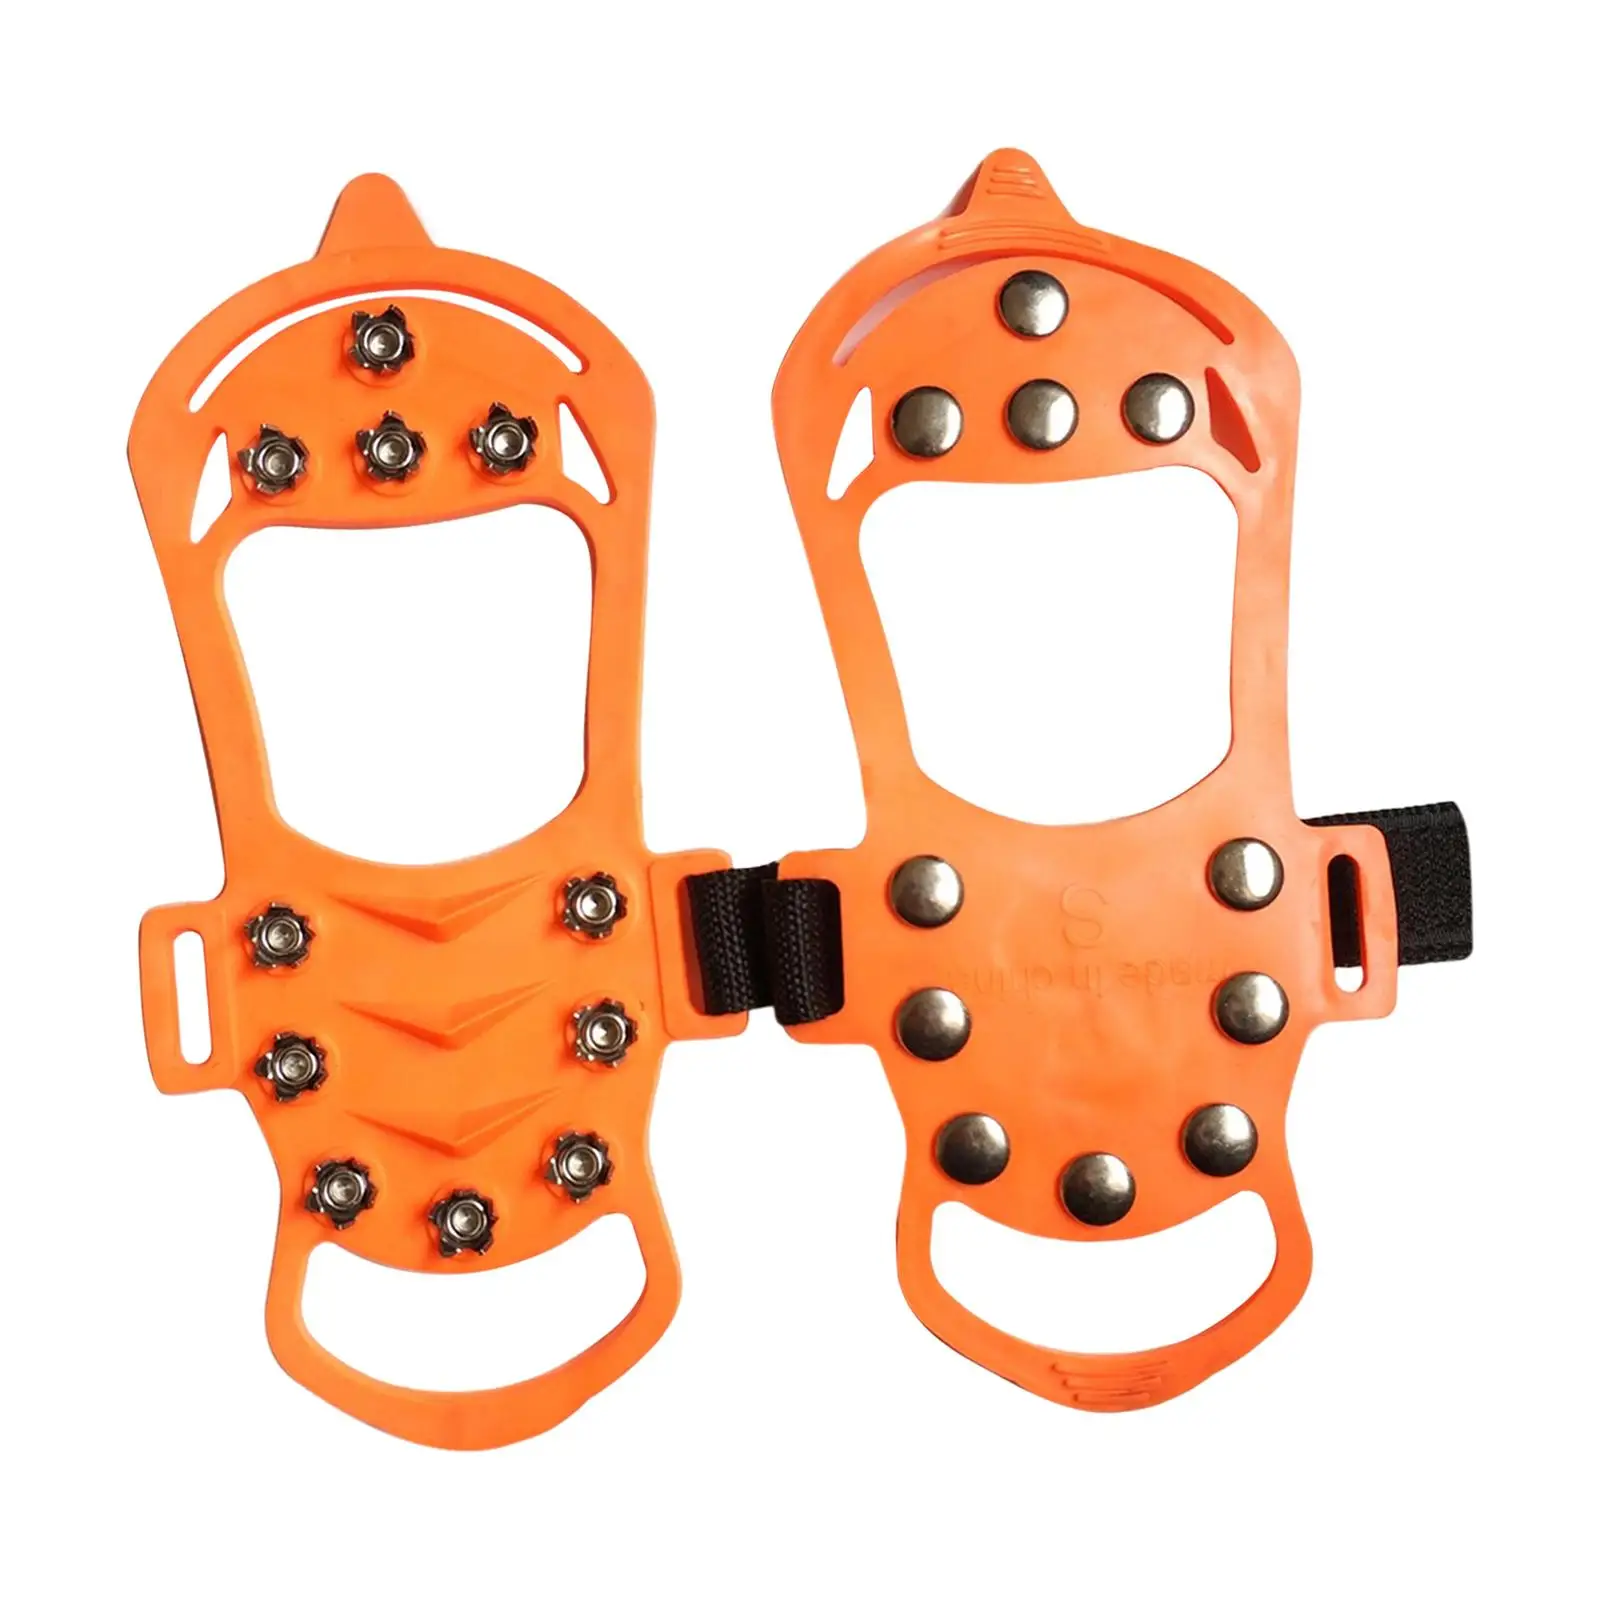 spikes, lightweight wear-resistant portable durable ice cleats for winter hiking